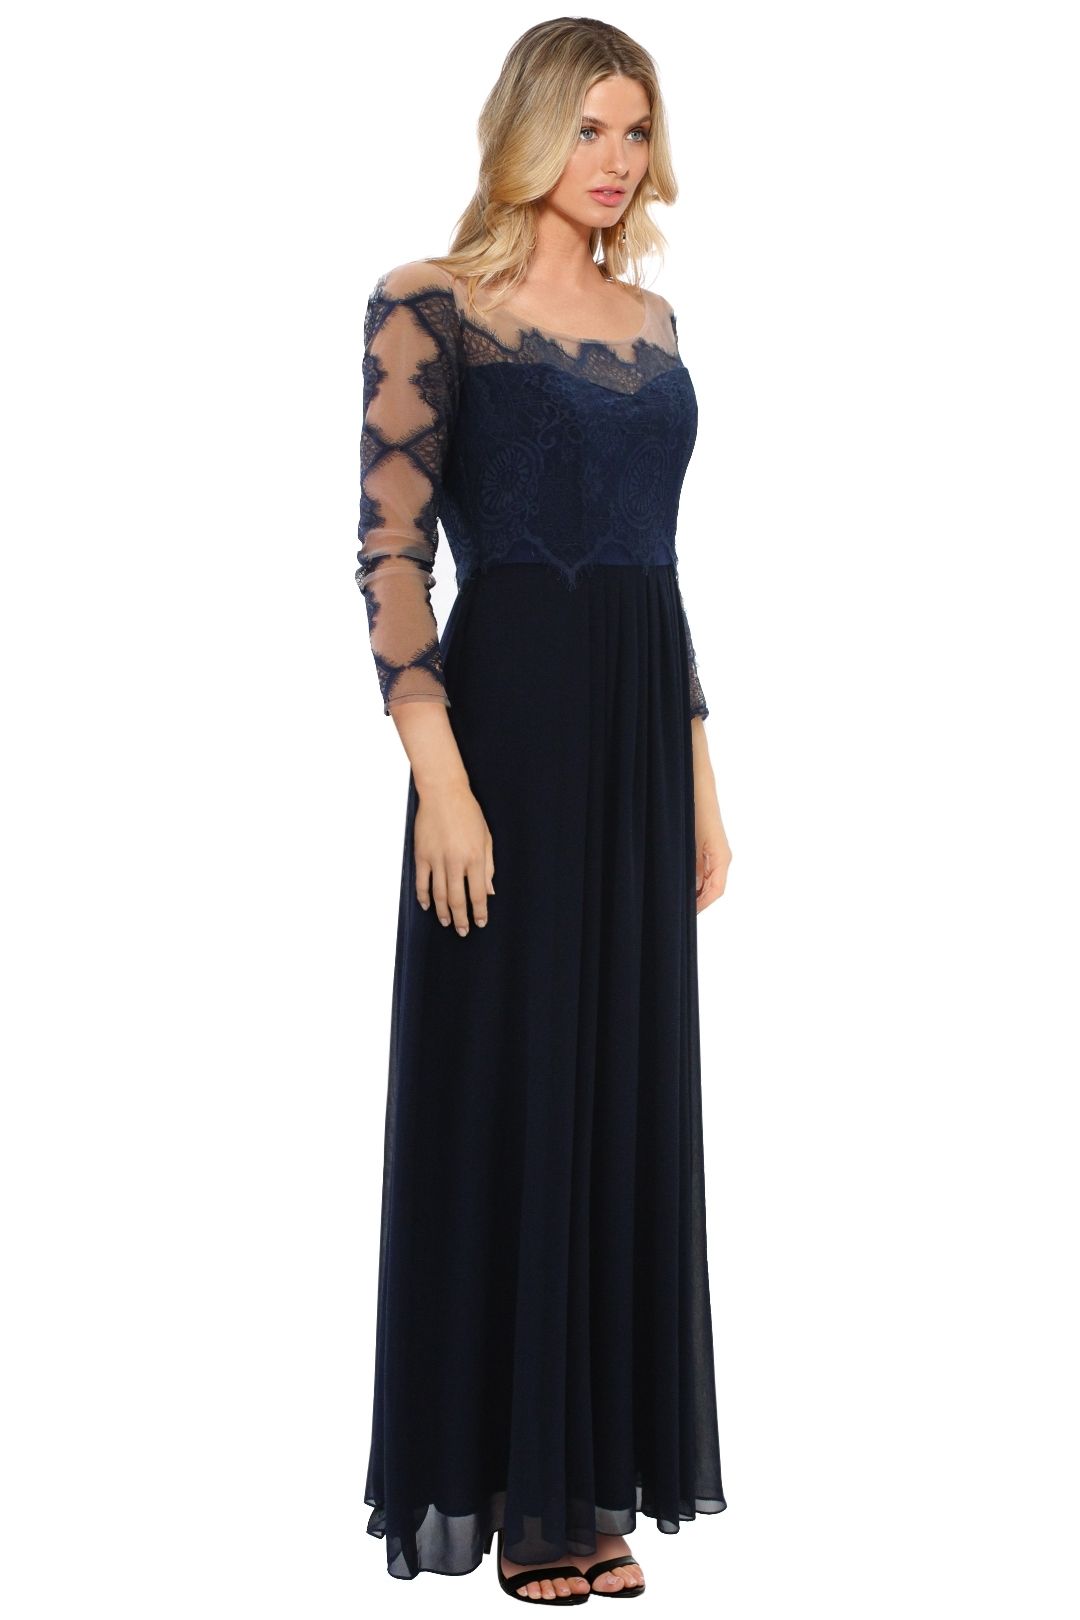 The Dress Shoppe - Gone With The Edge Gown - Navy - Side